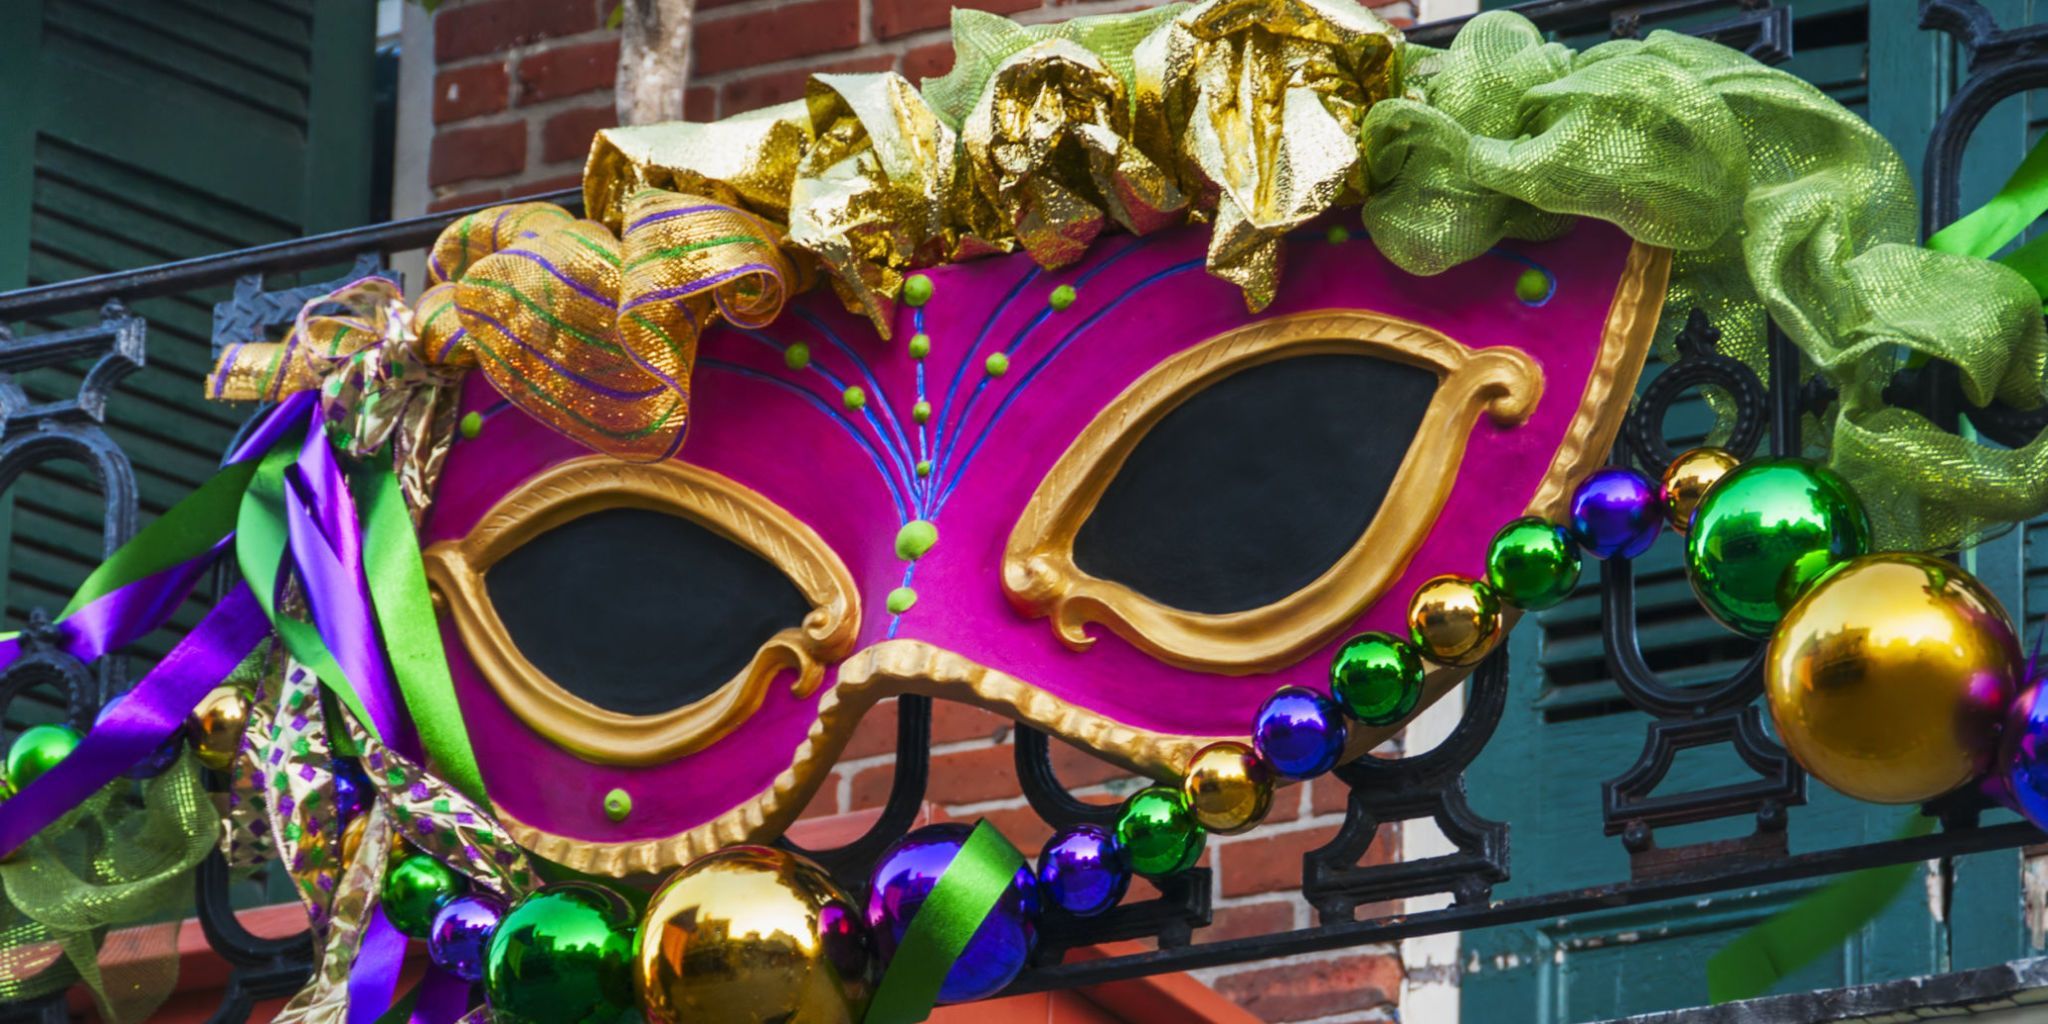 Happy Mardi Gras! Decorate with easy to make crafts - Deeply Southern Home